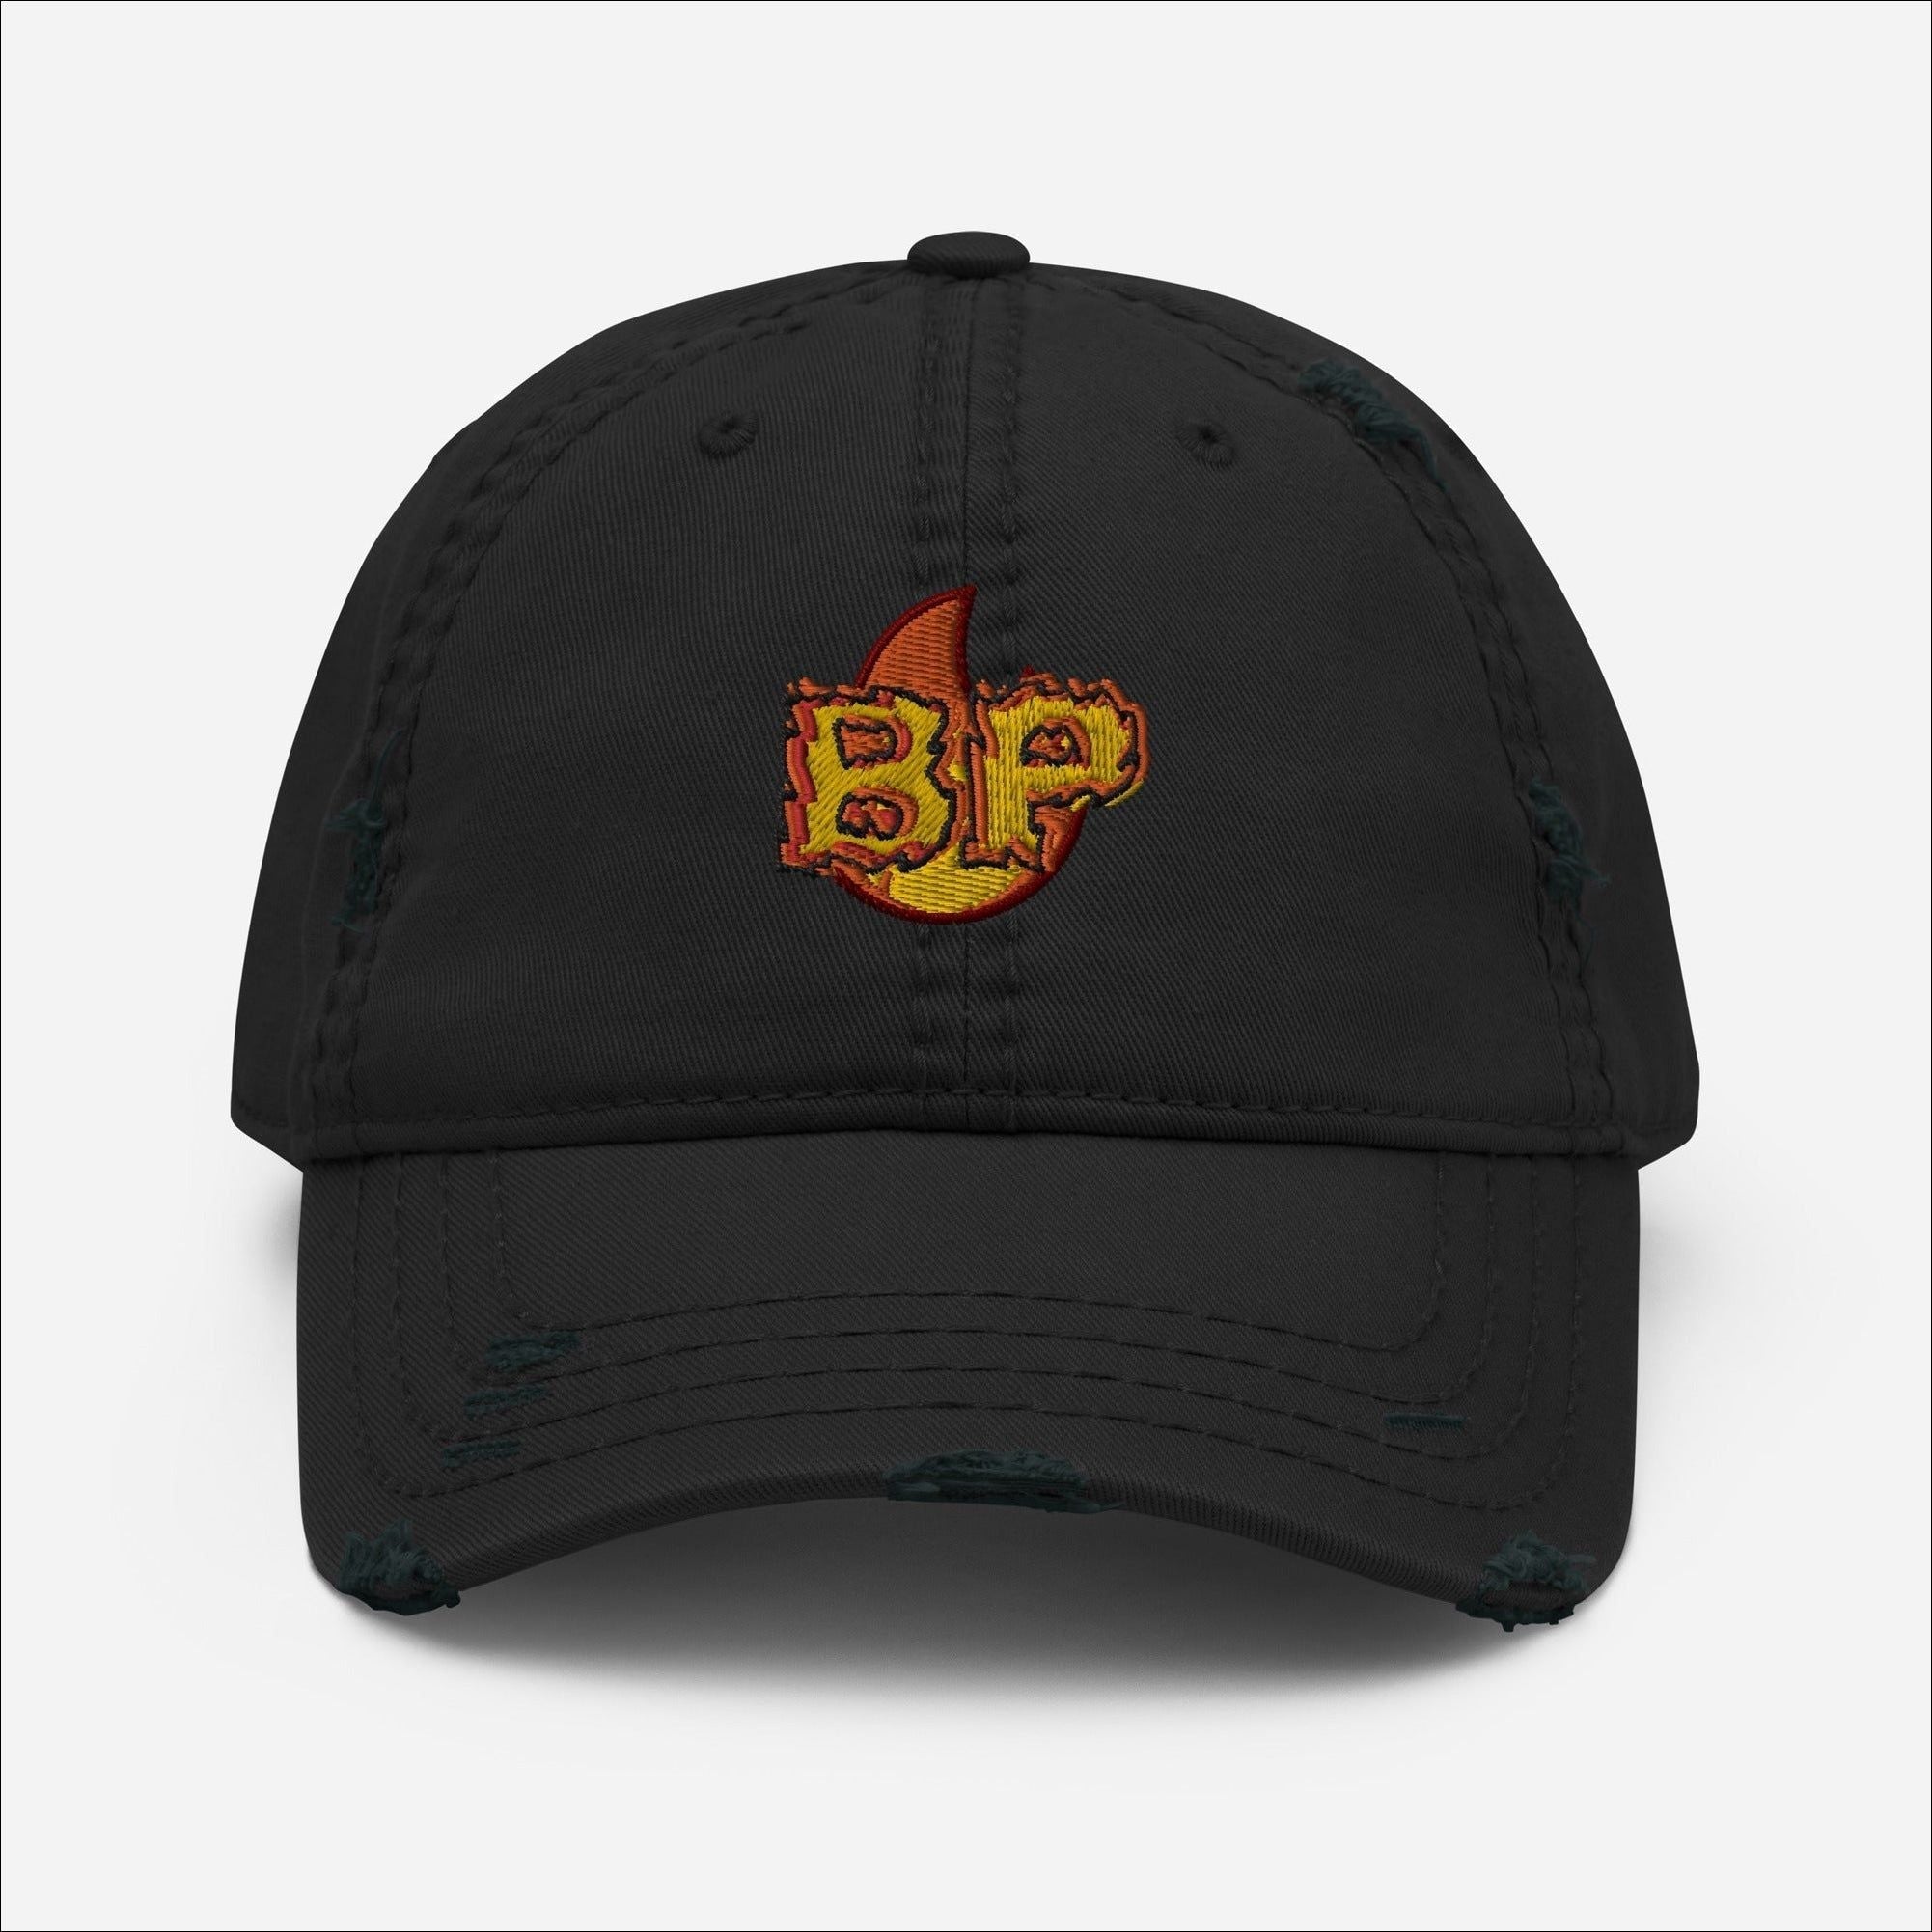 Fuel Your Fire Dad Hat - Bad Product